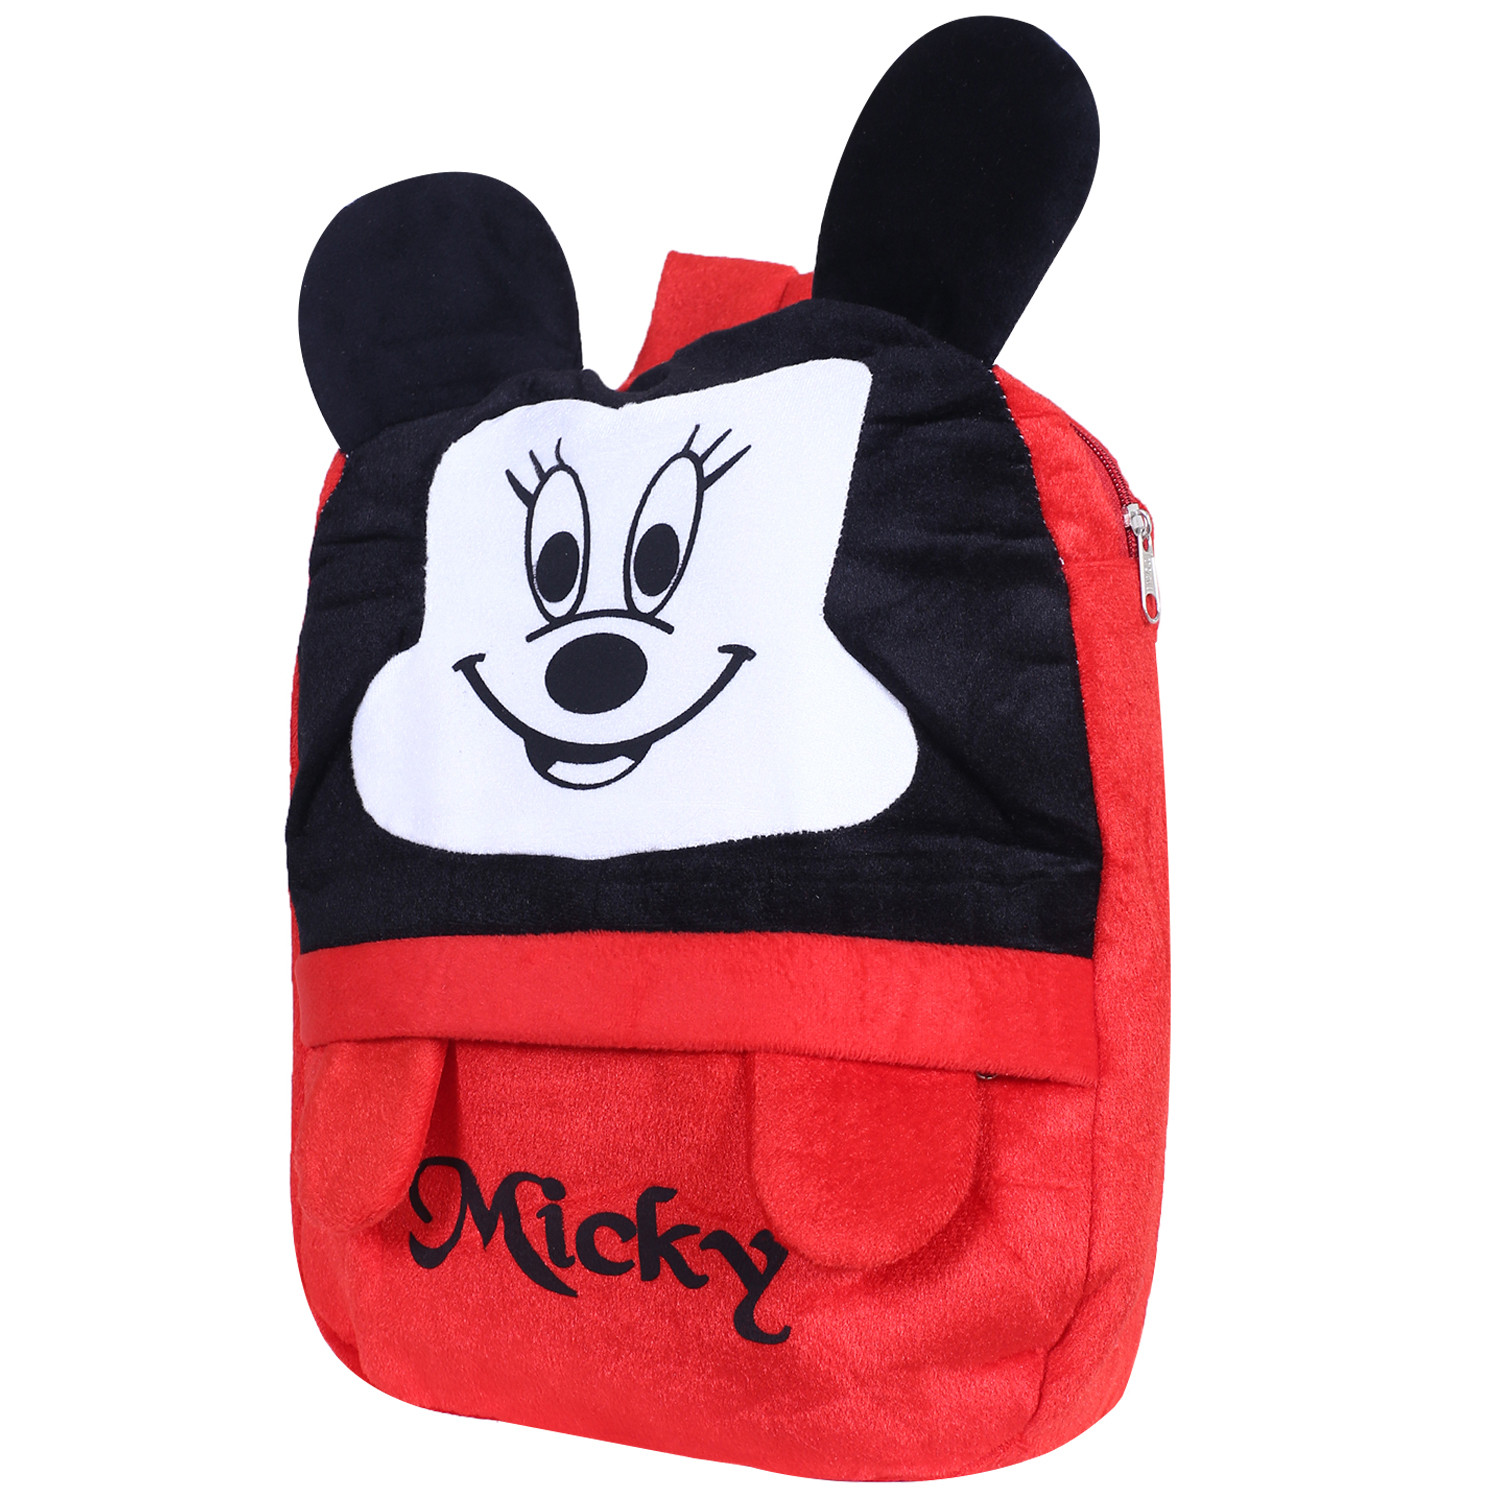 Kuber Industries Disney Mickey Plush Backpack|2 Compartment Velvet School Bag|Upper Side Mickey Face Haversack For Travel,School with Zipper (Red)